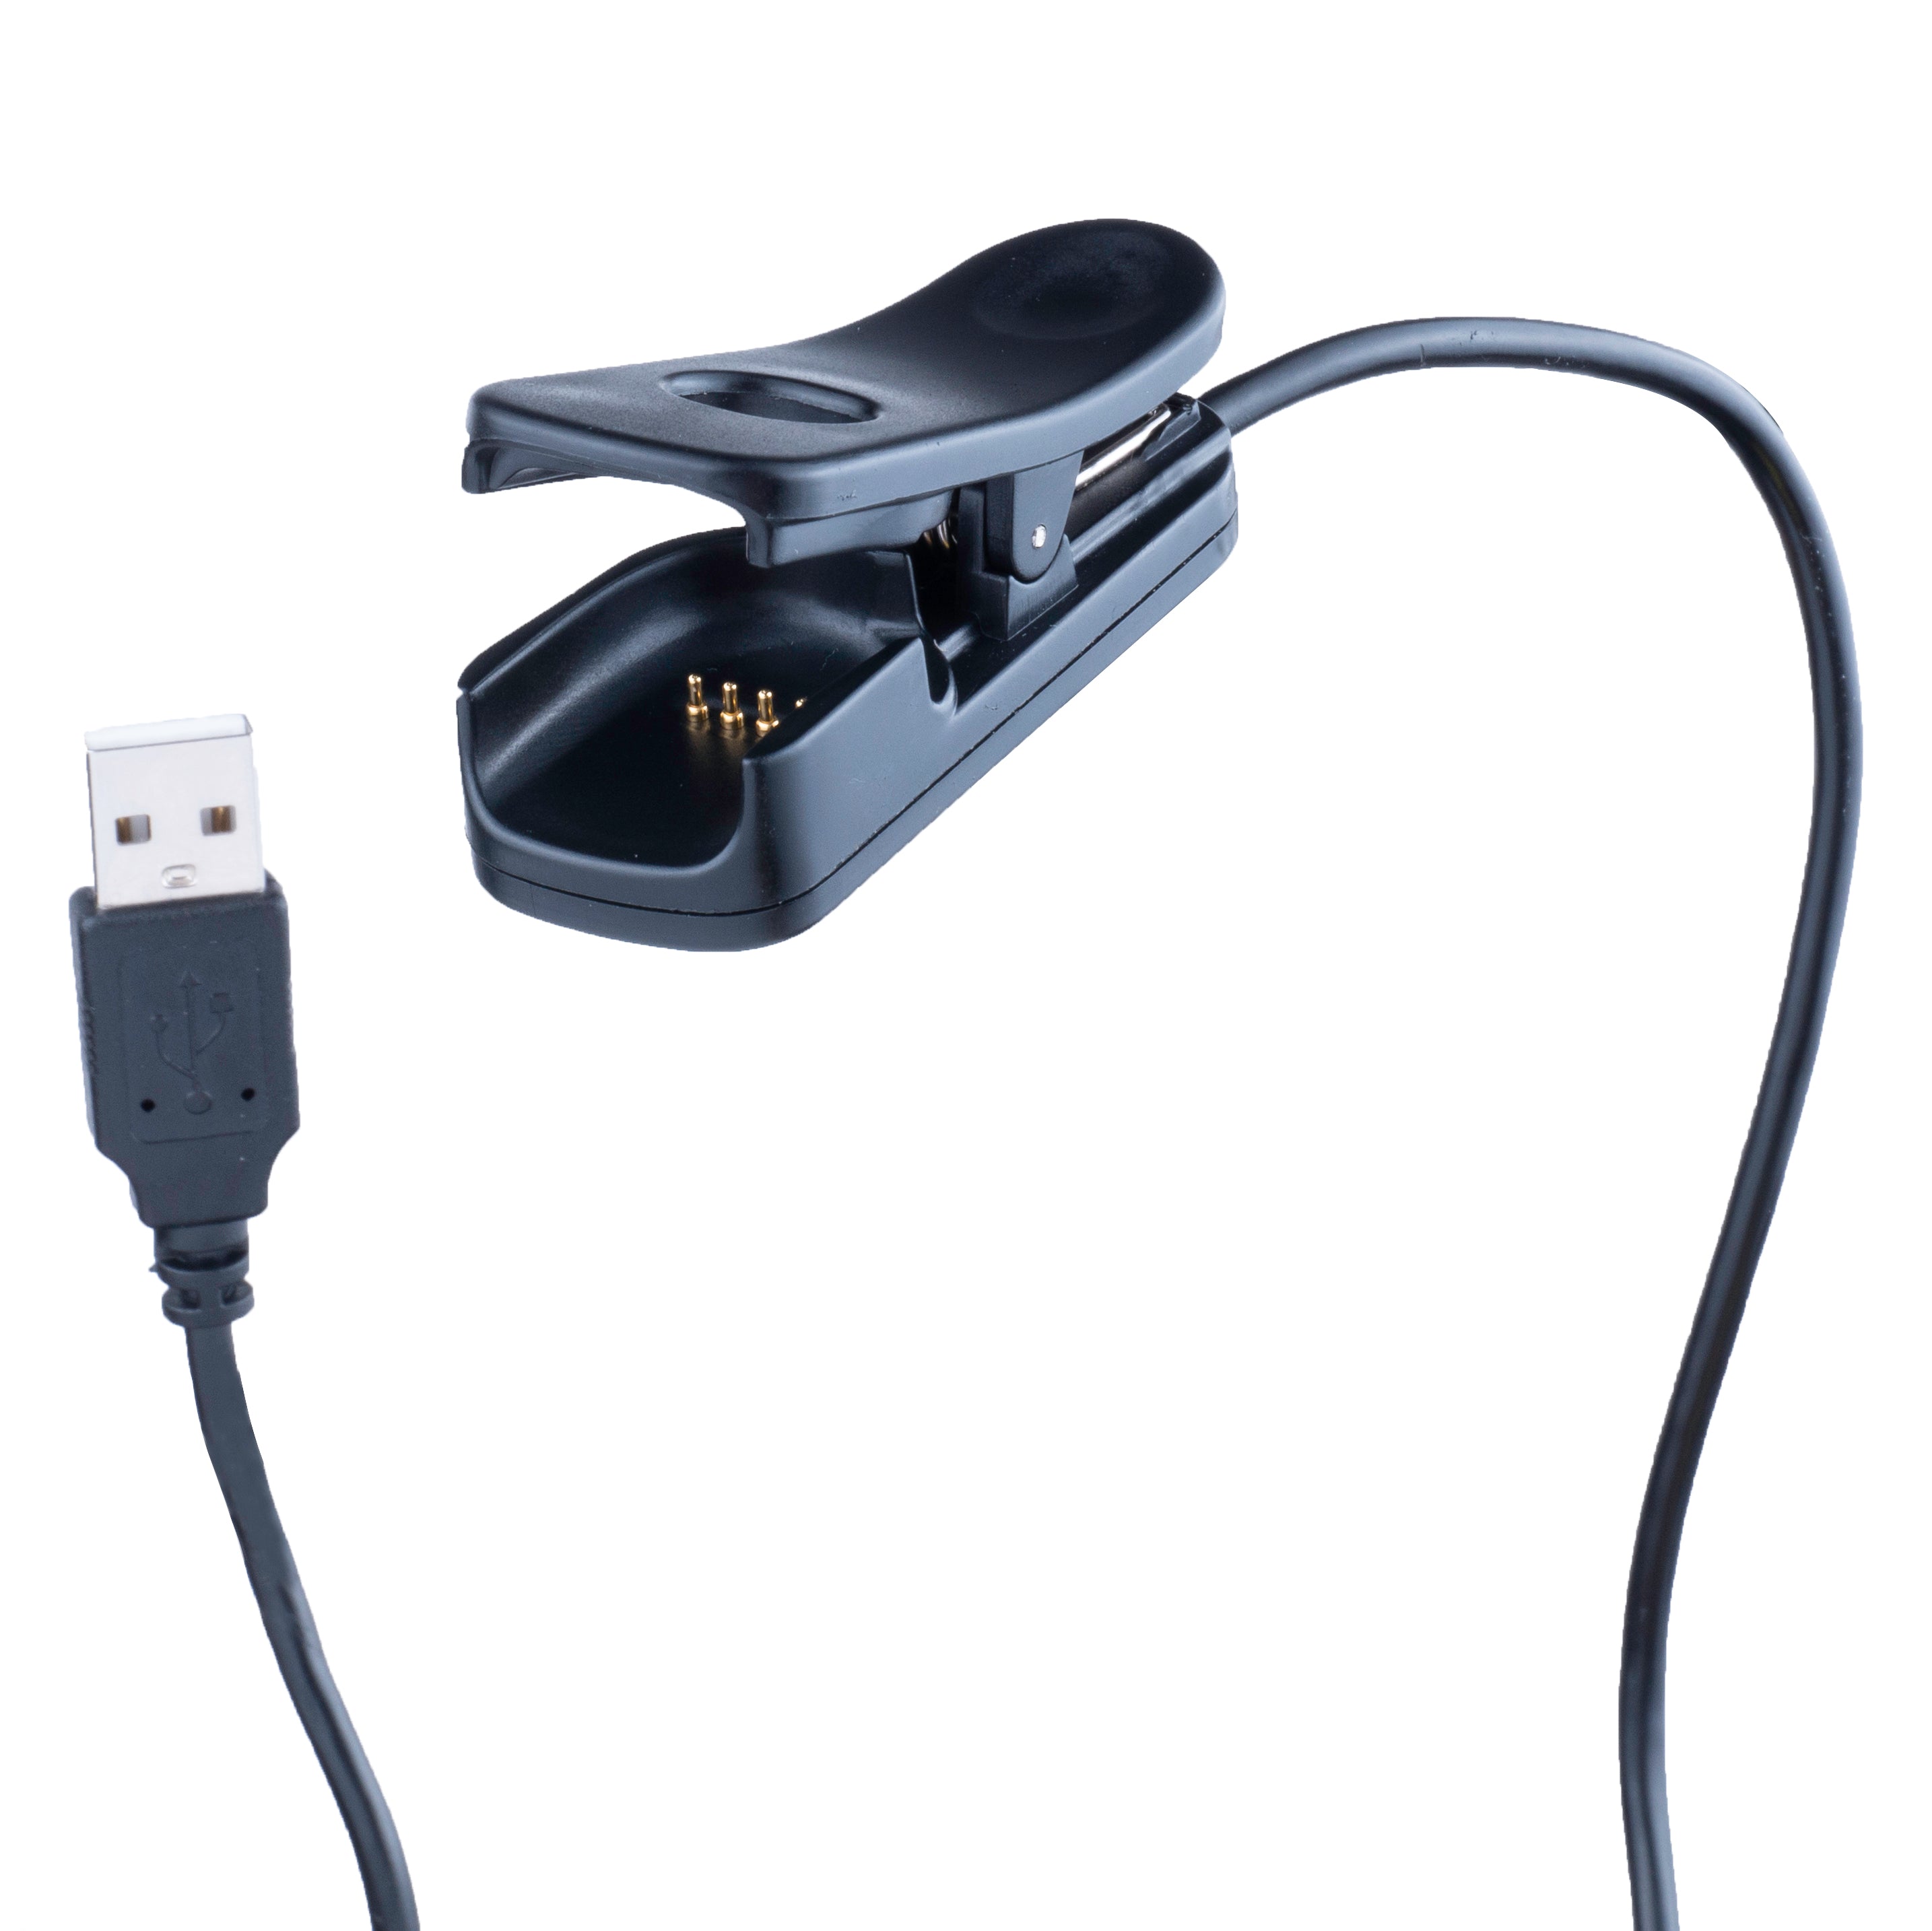 USB Charge & Sync Cord for Swimbuds MP3 Wearable Player